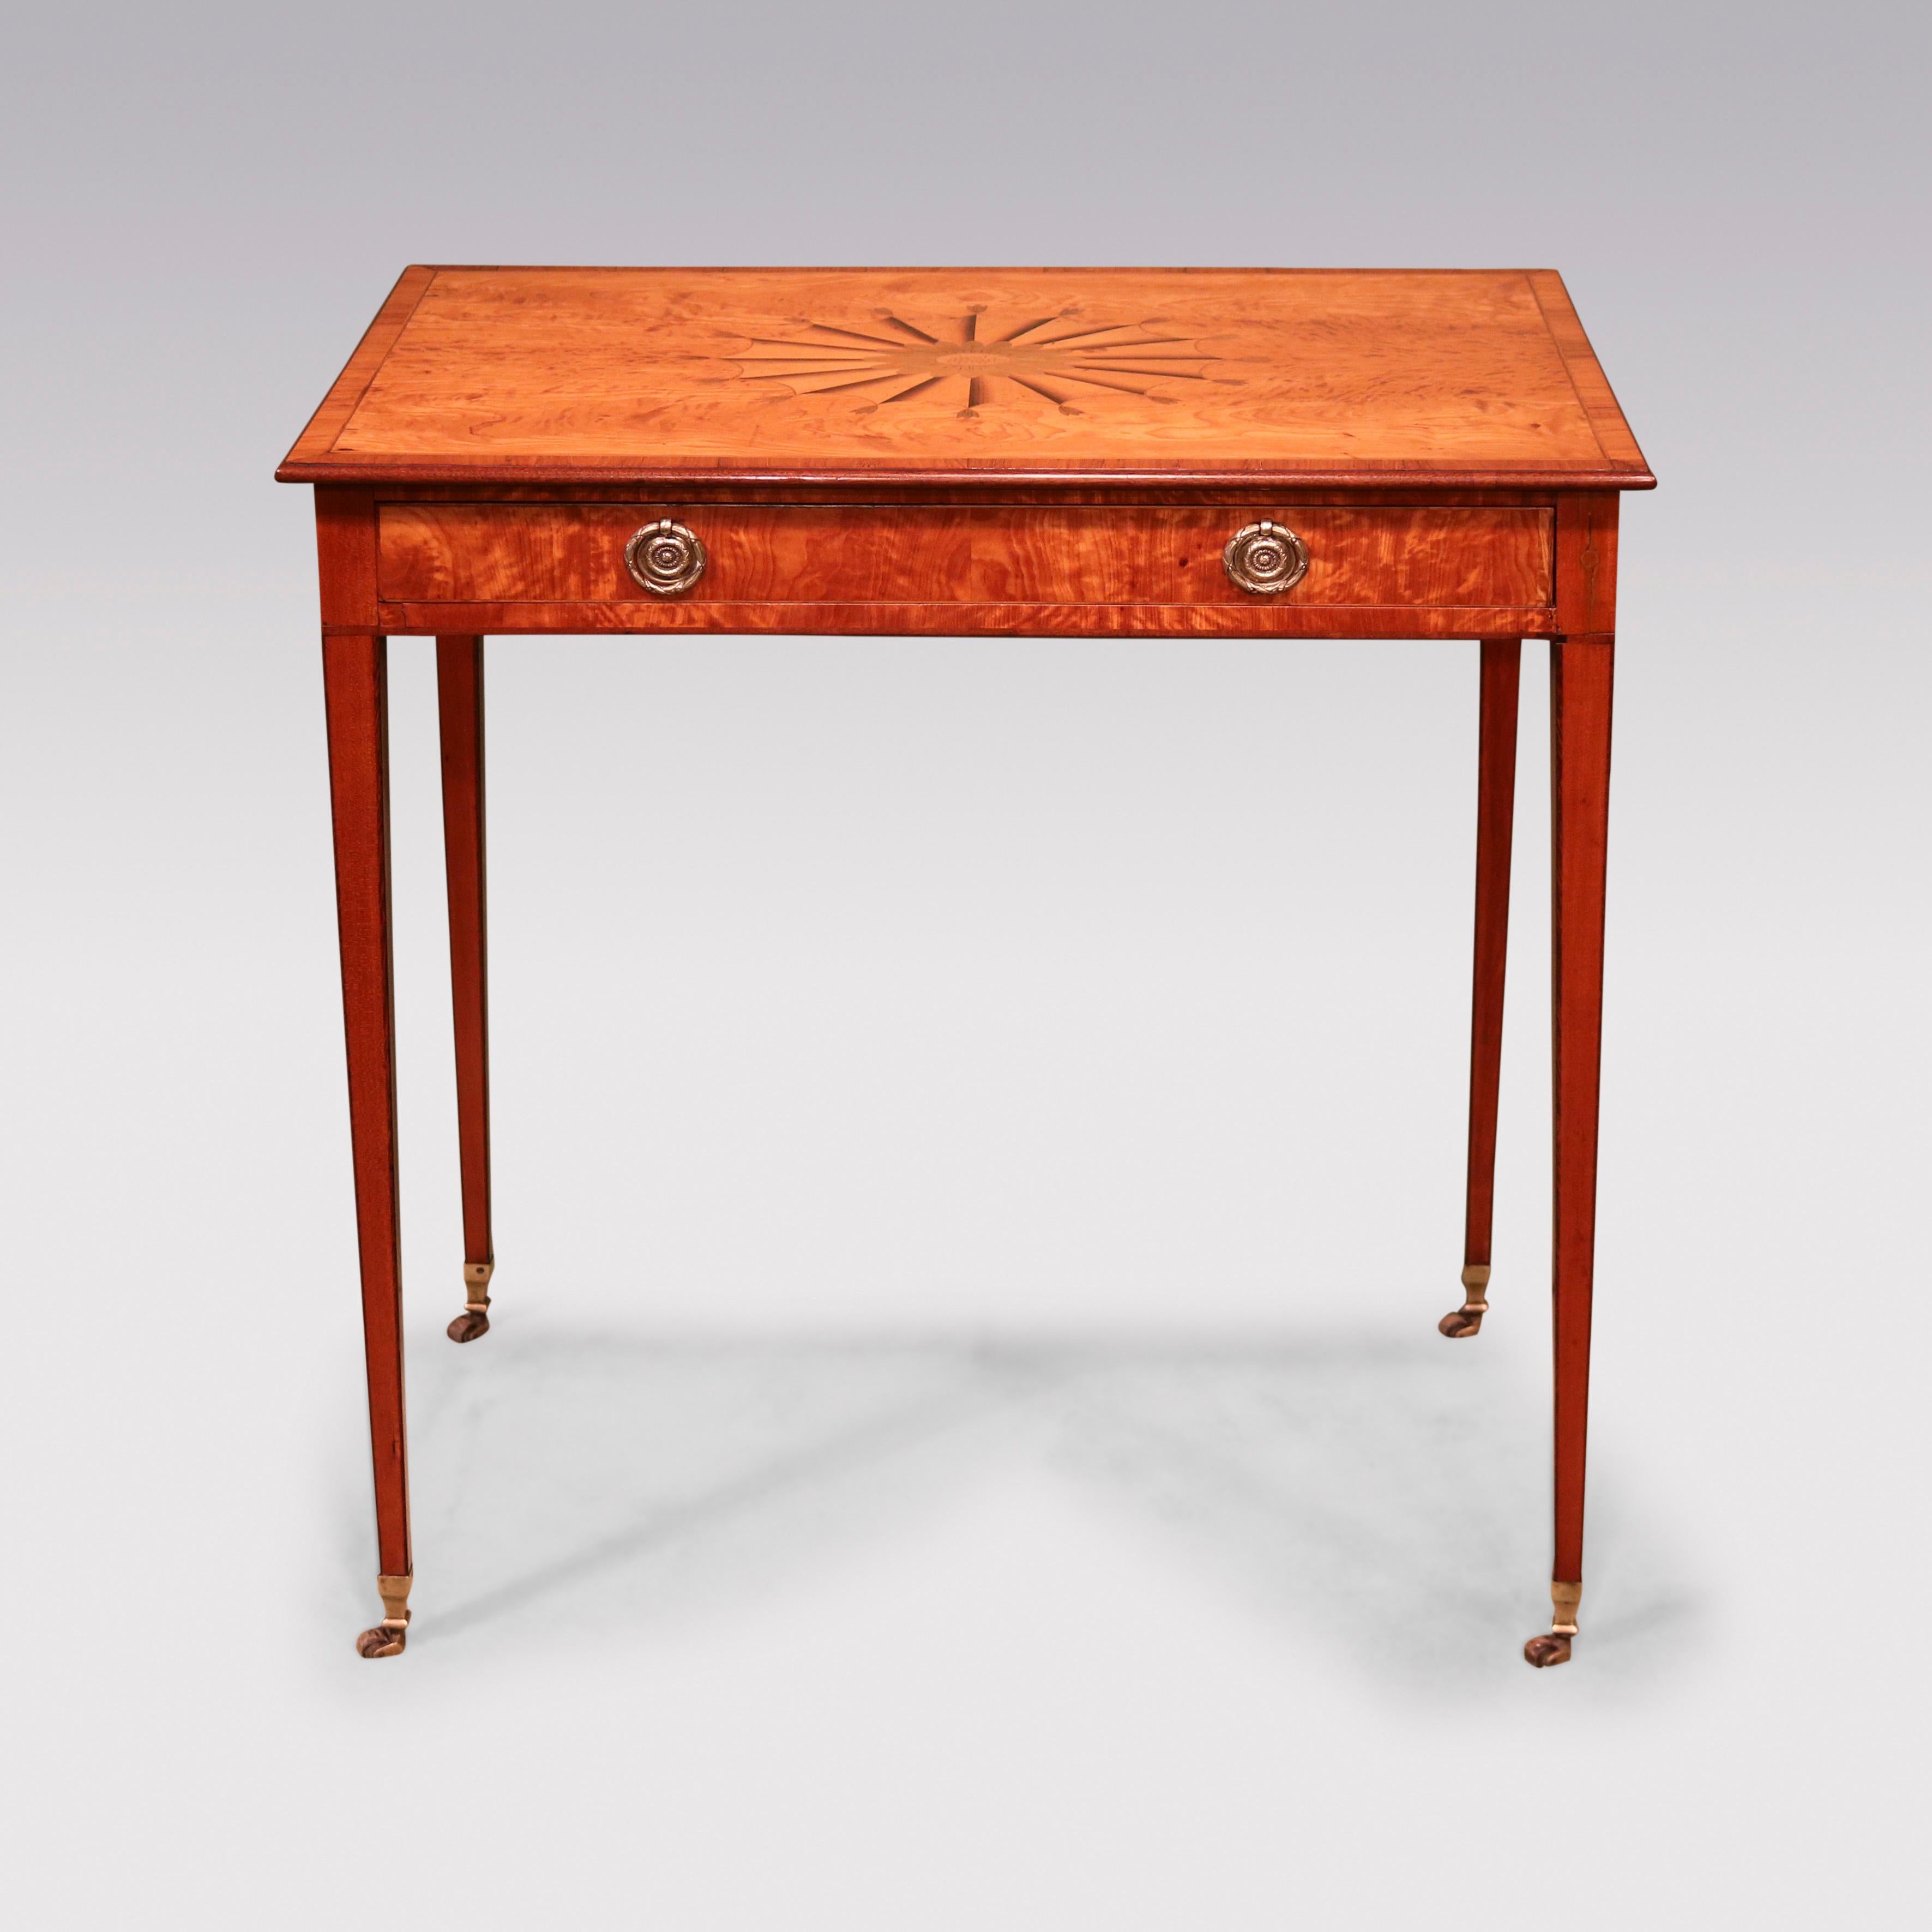 A fine quality late 18th Century well-figured satinwood 1 drawer Sidetable retaining original handles, boxwood & ebony strung throughout, having tulipwood crossbanded rectangular top with boxwood fan & penwork decorated centre panel, supported on